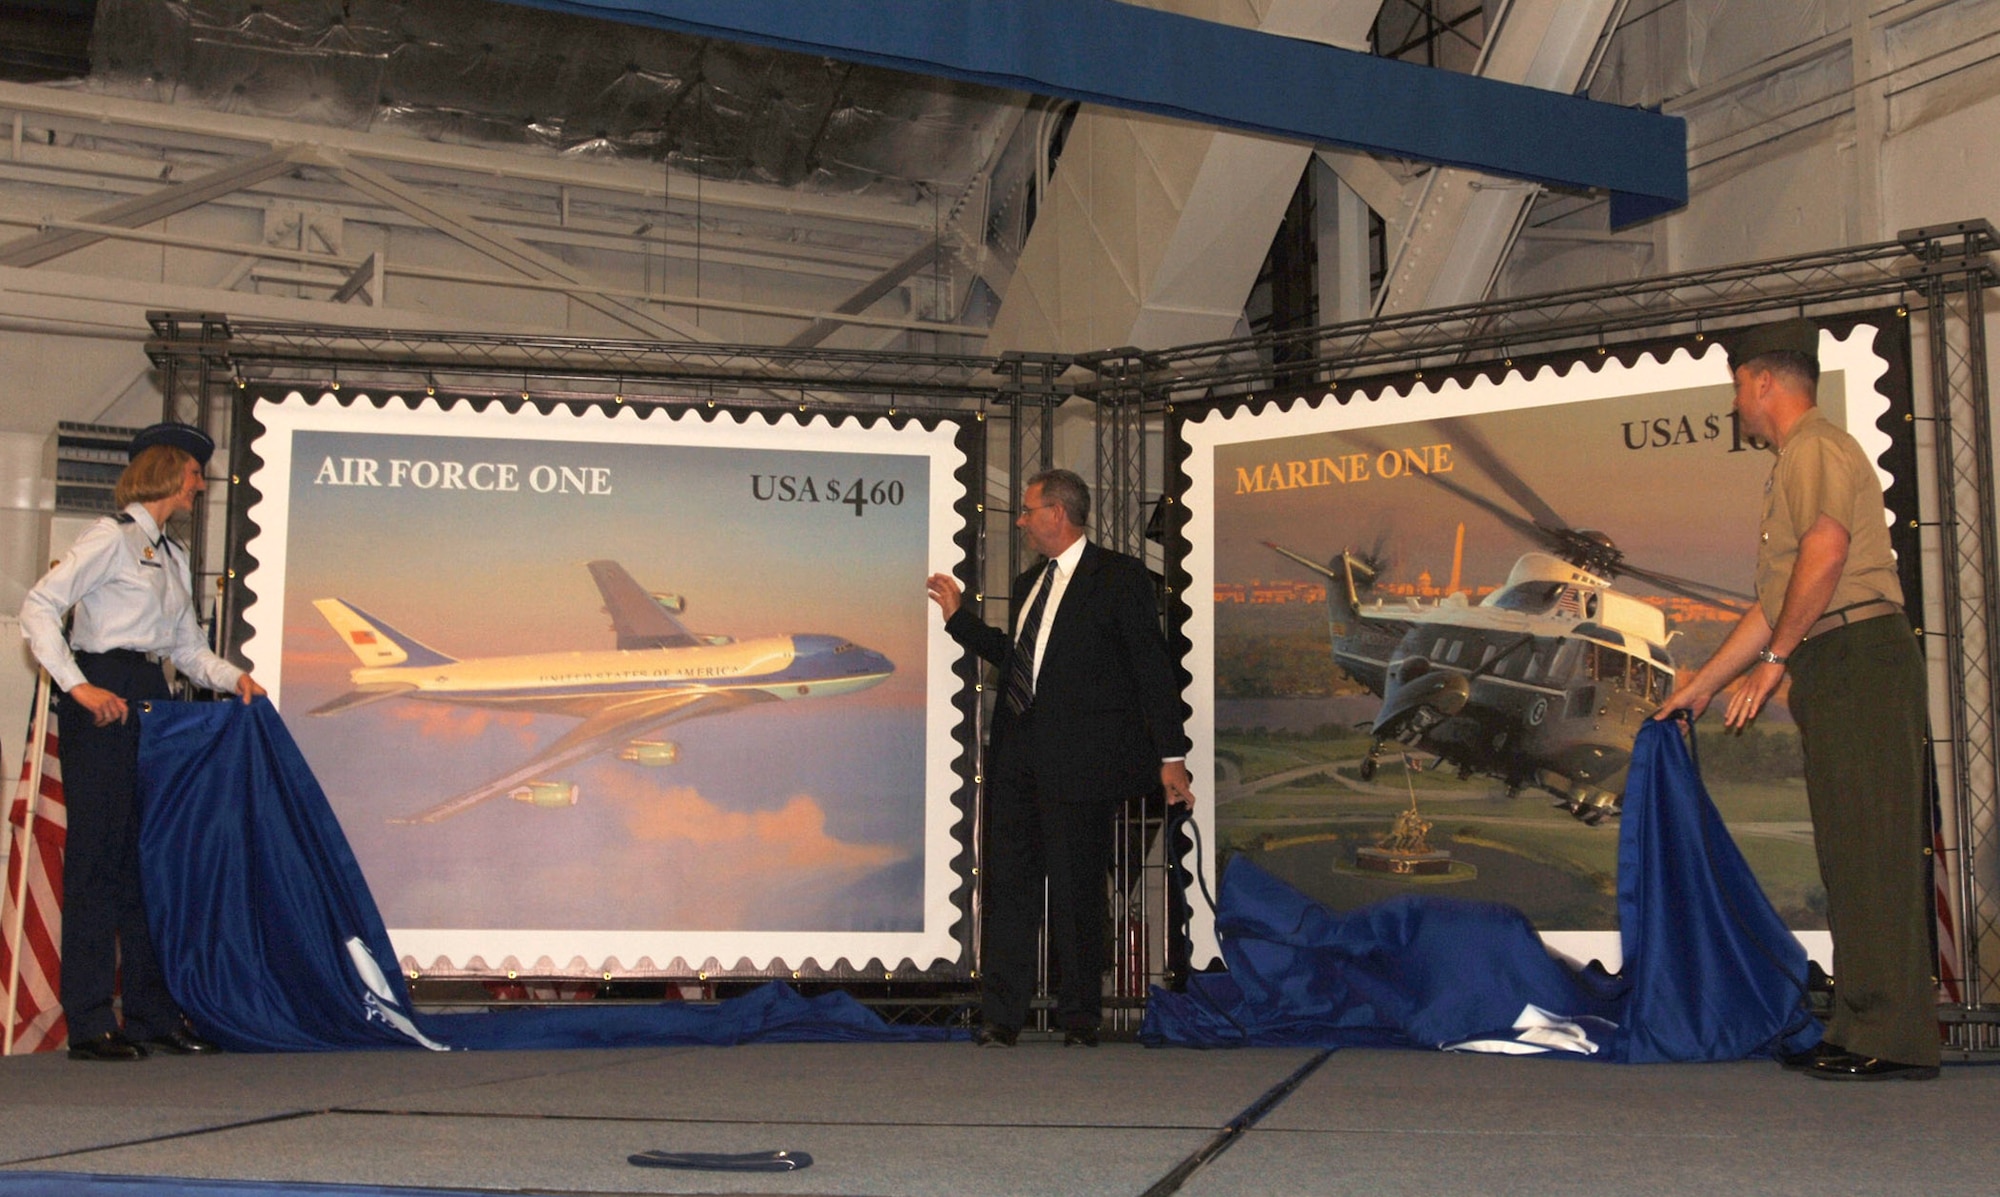 Air Force One featured on new stamp > Air Force > Article Display